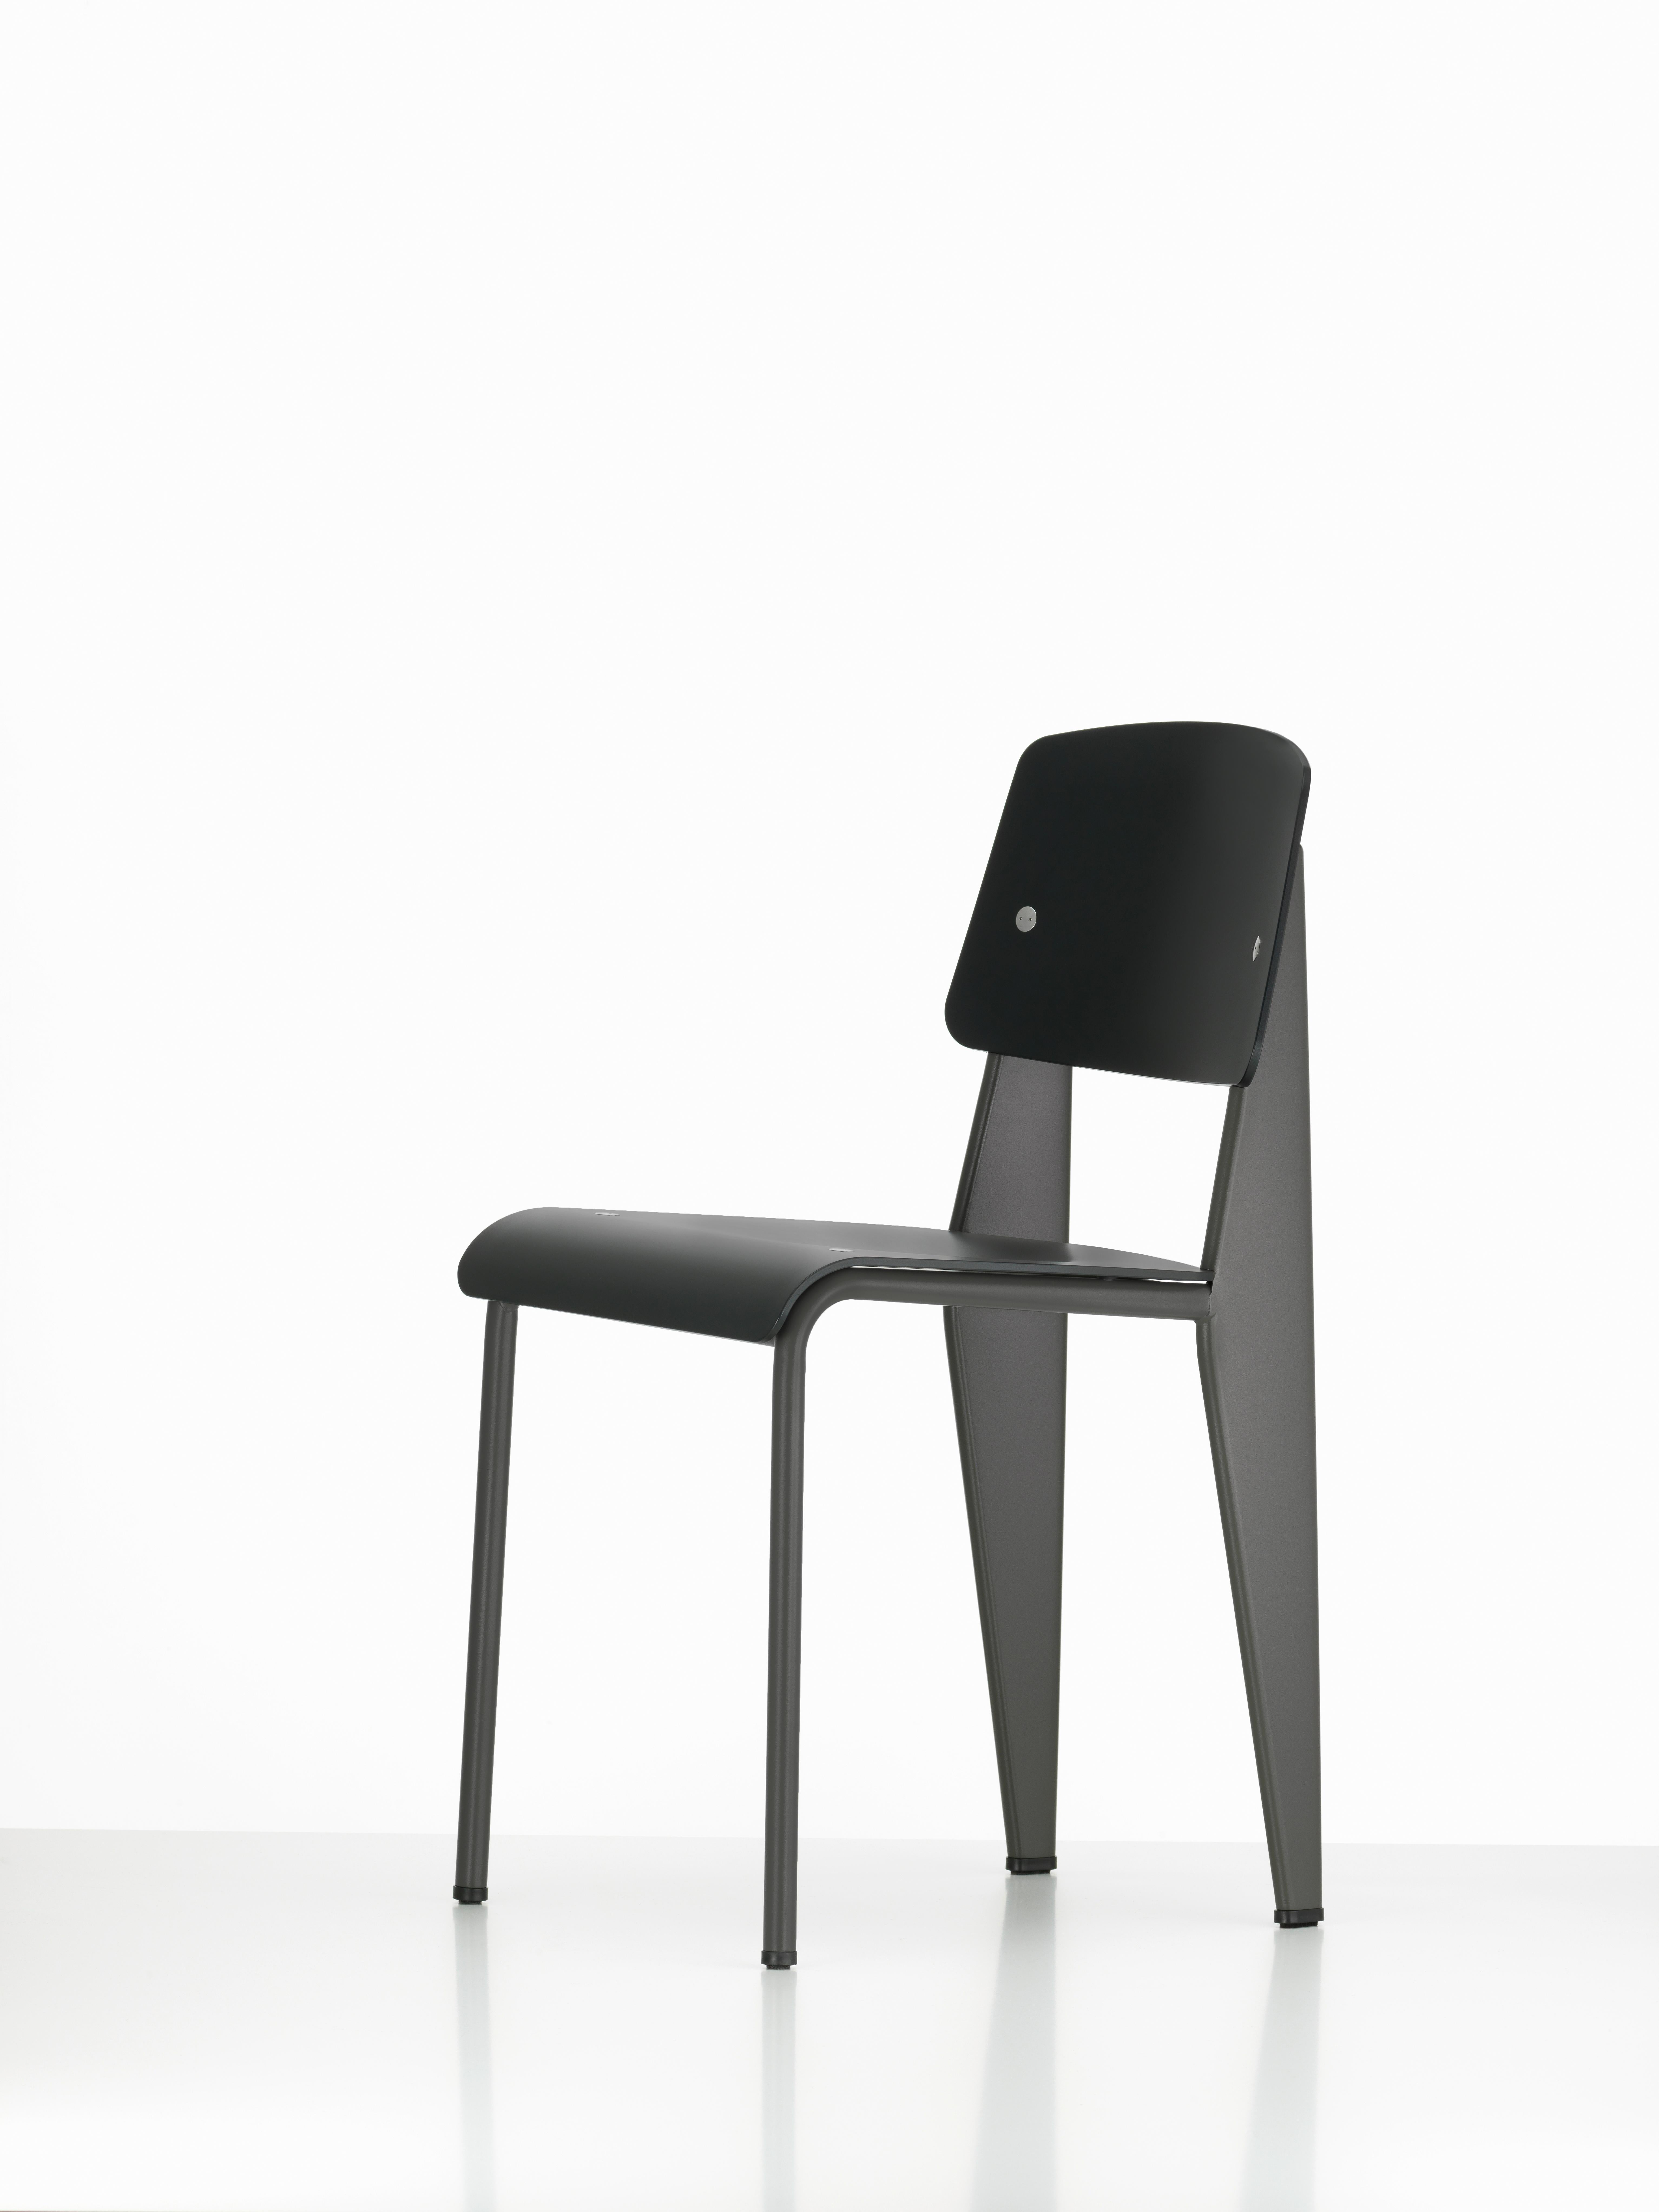 Jean Prouvé Standard Chair SP in Black for Vitra 5